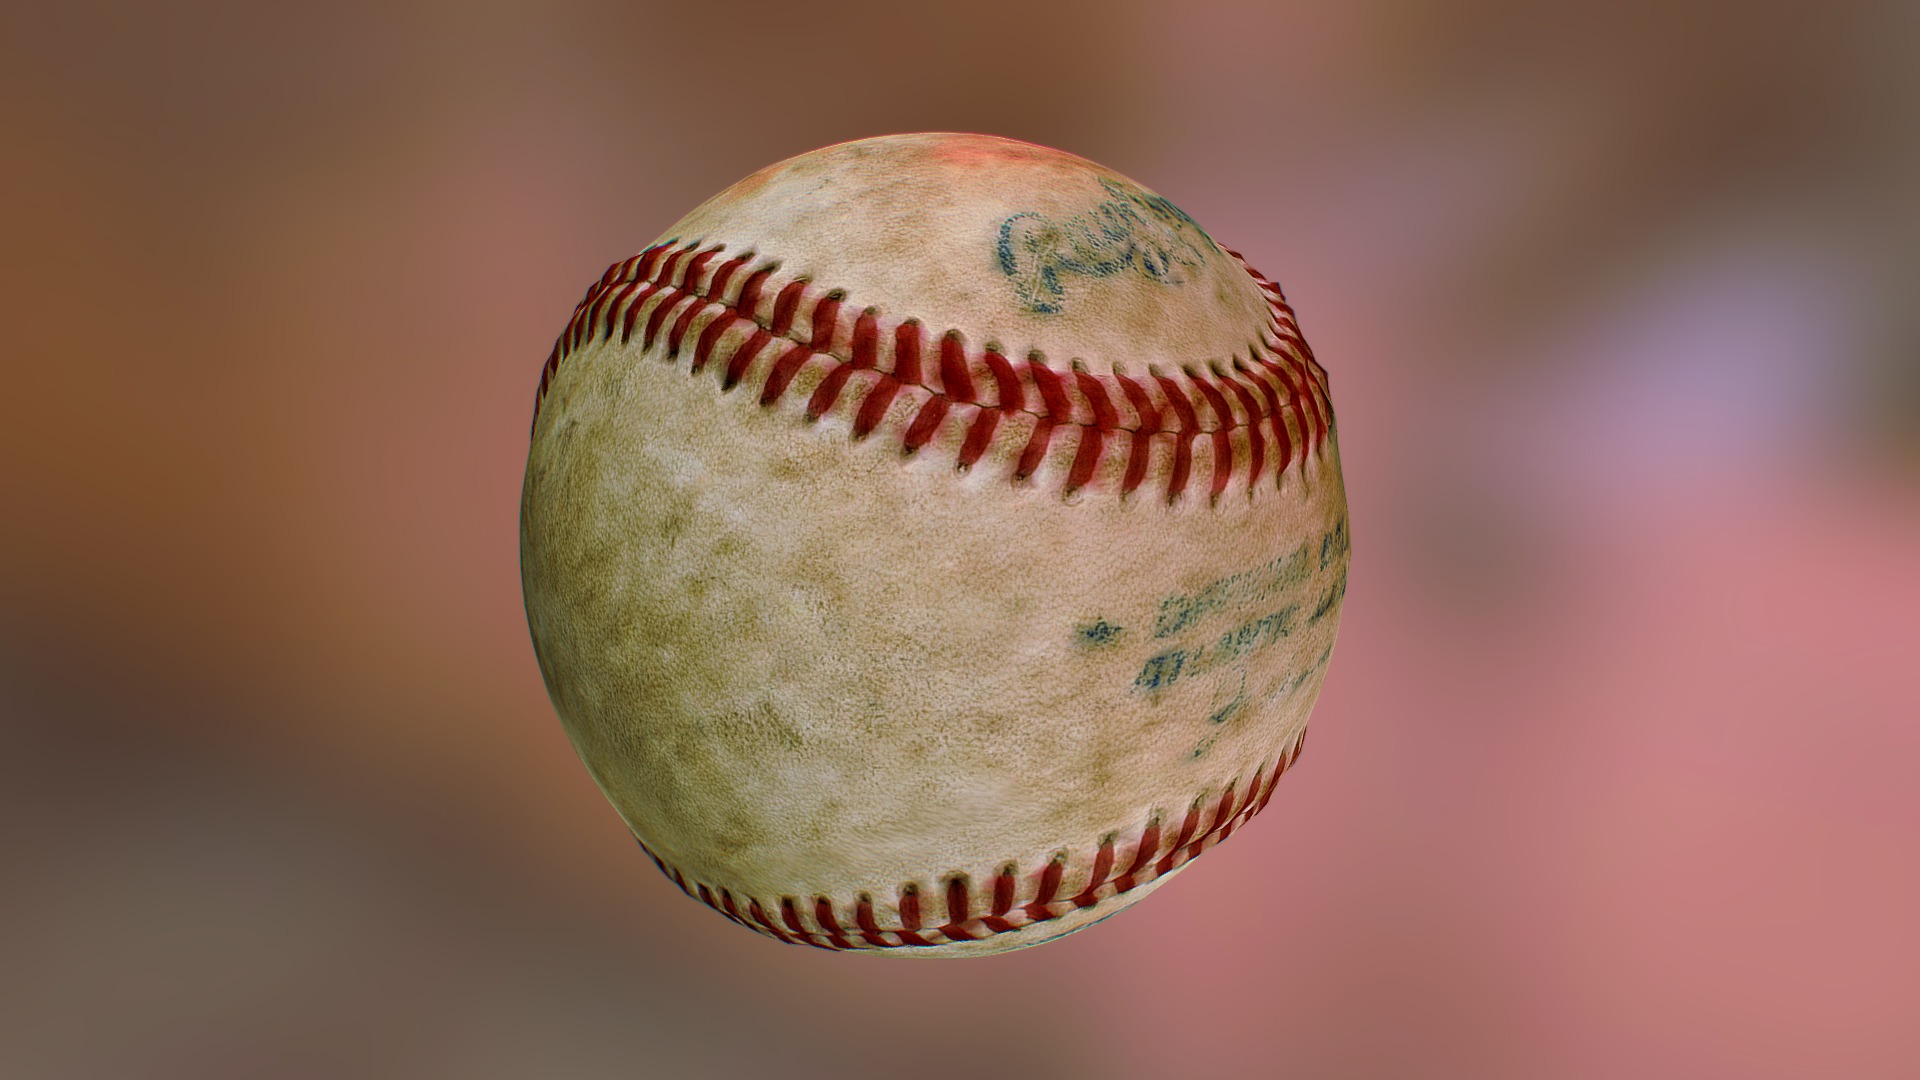 3D model Old Baseball 2 - This is a 3D model of the Old Baseball 2. The 3D model is about a baseball on a pink background.